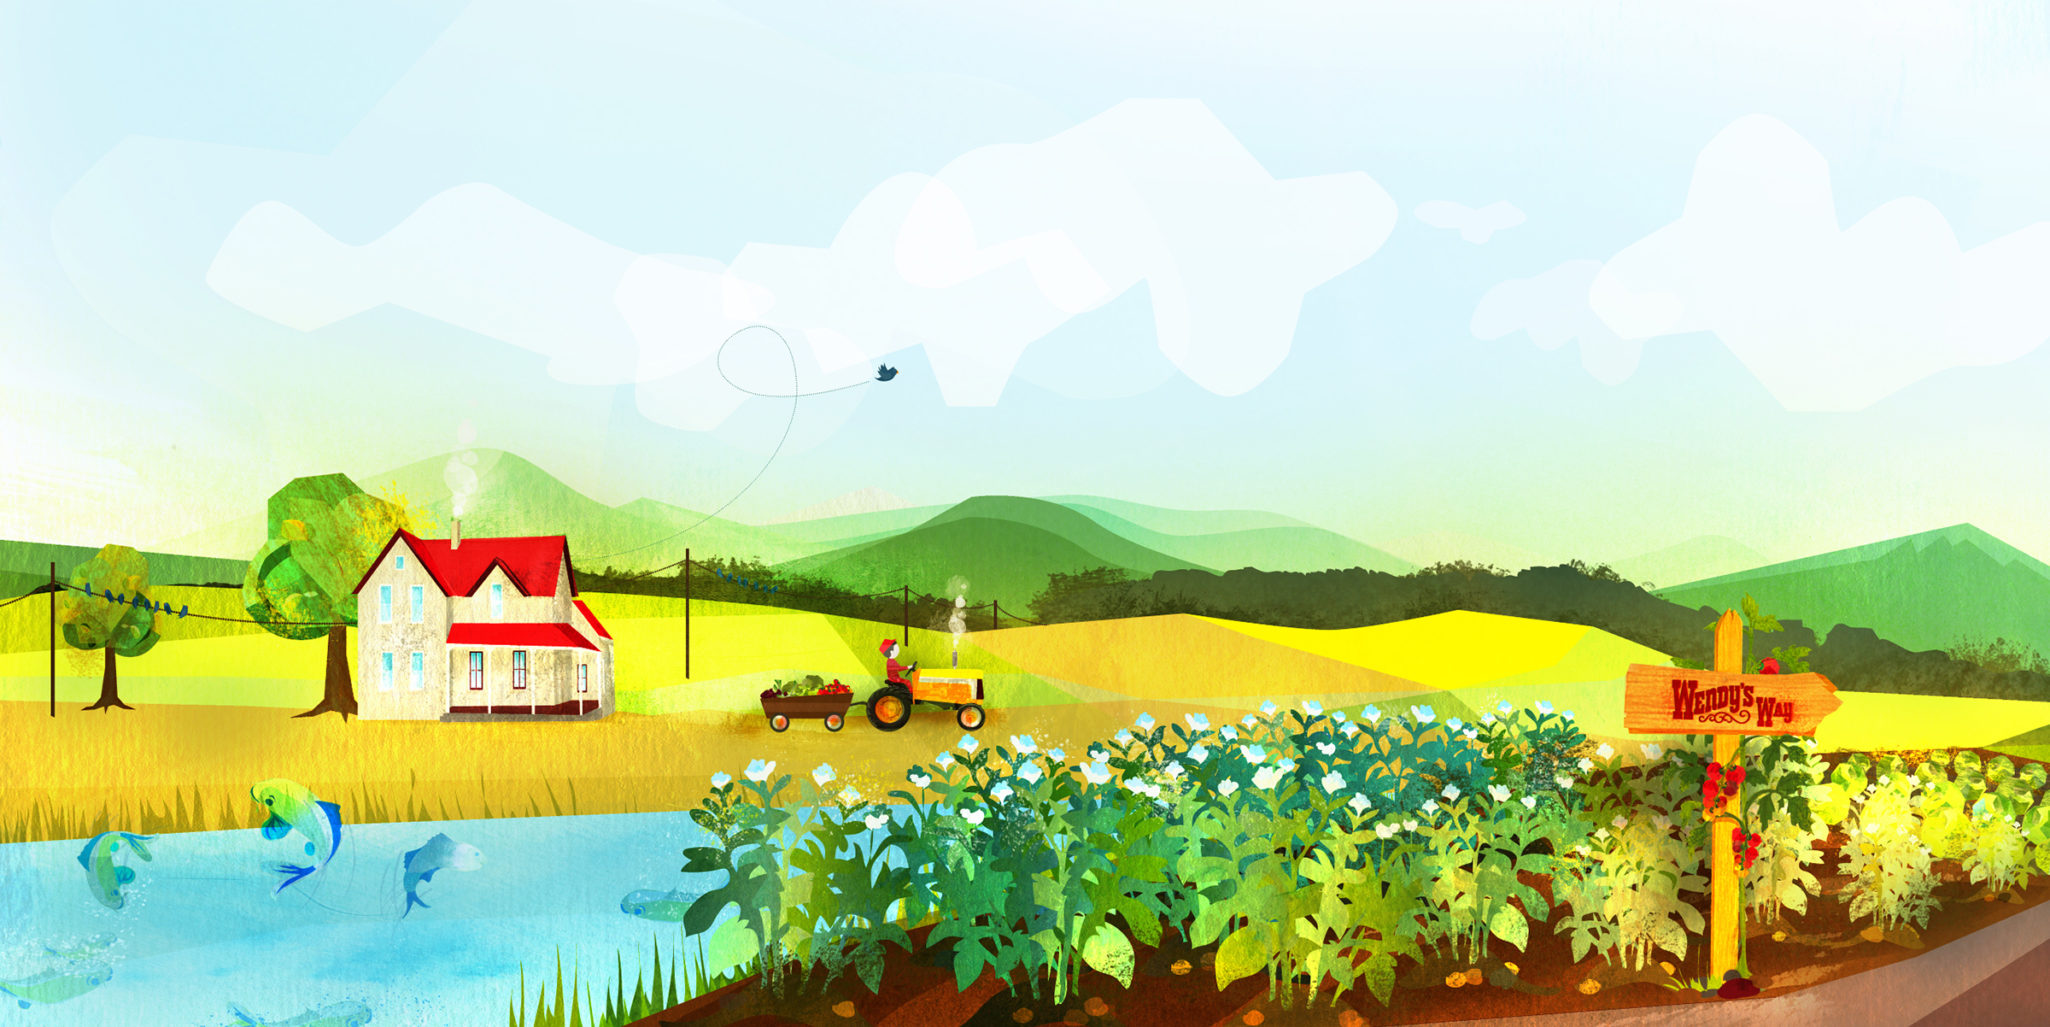 Panoramic illustration showing wendy's farm